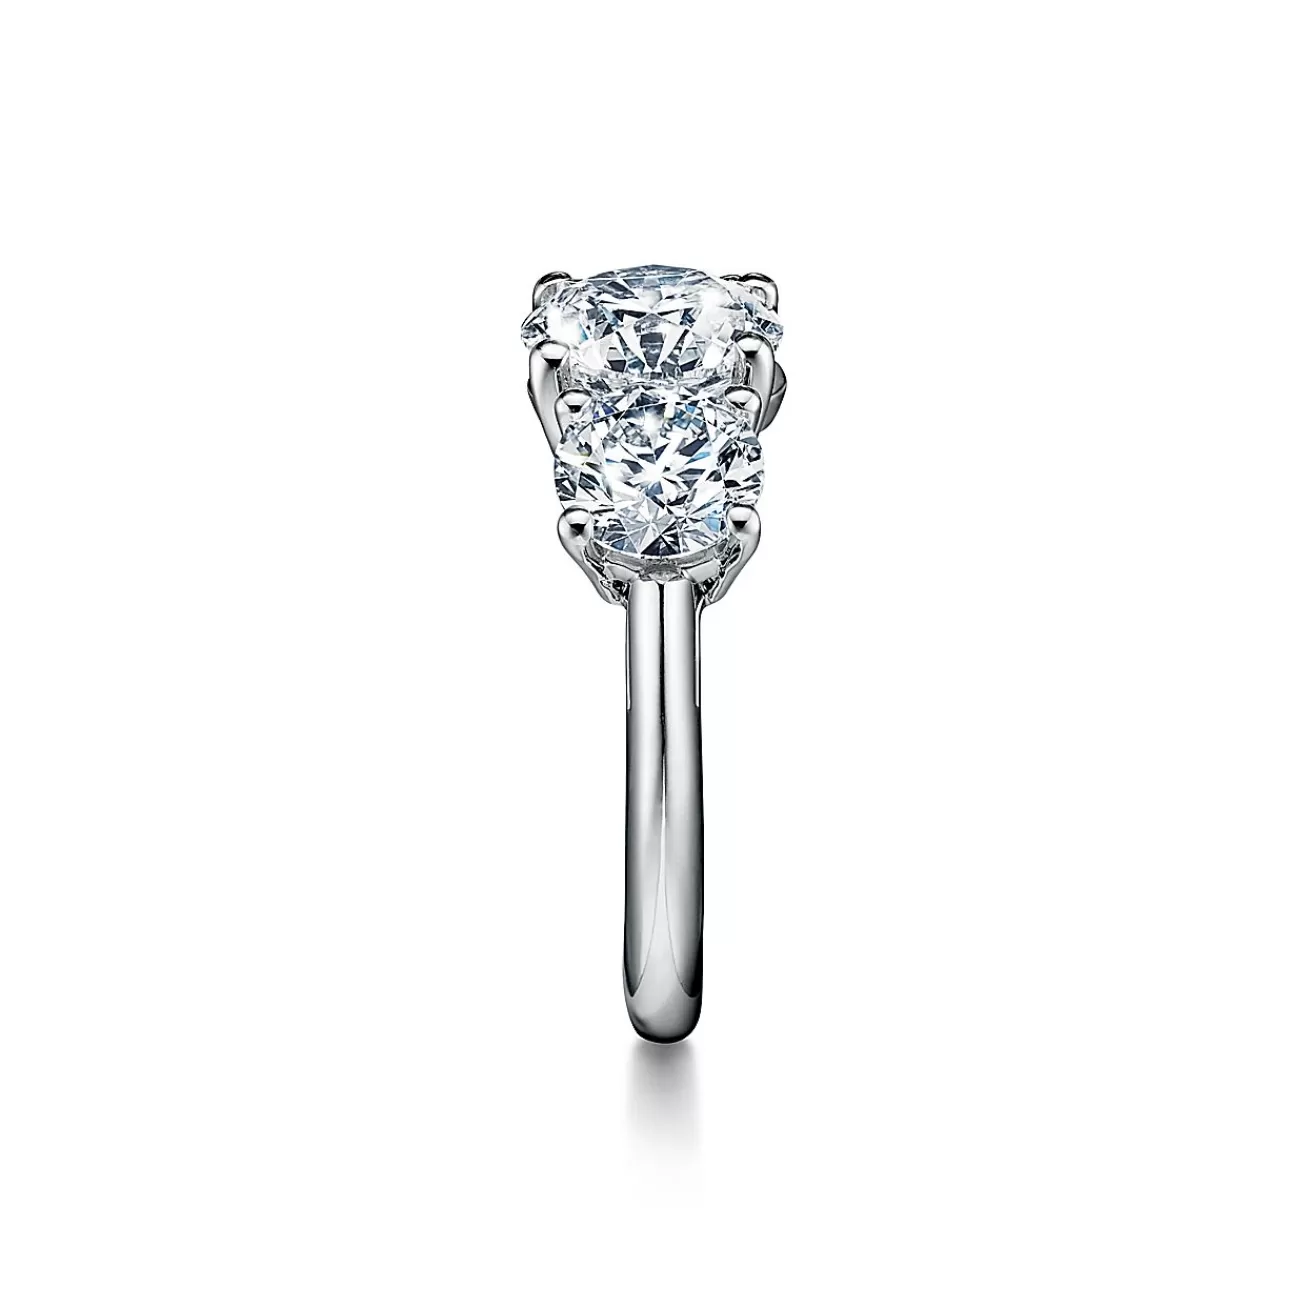 Tiffany & Co. Tiffany Three Stone engagement ring in platinum: an expression of eternal love. | ^ Engagement Rings